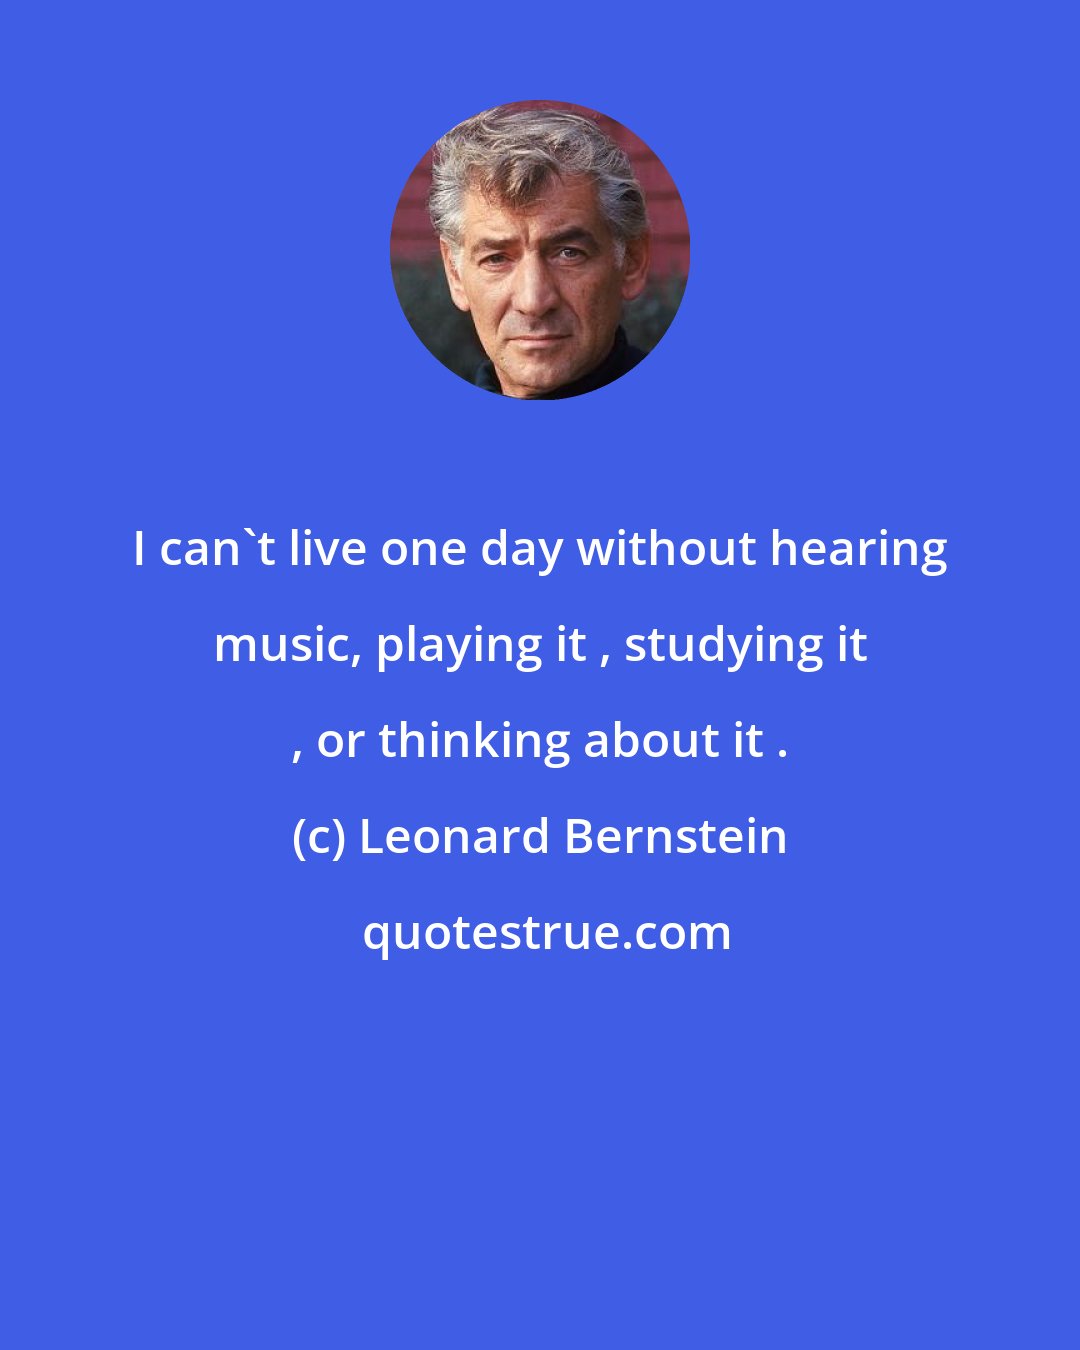 Leonard Bernstein: I can't live one day without hearing music, playing it , studying it , or thinking about it .